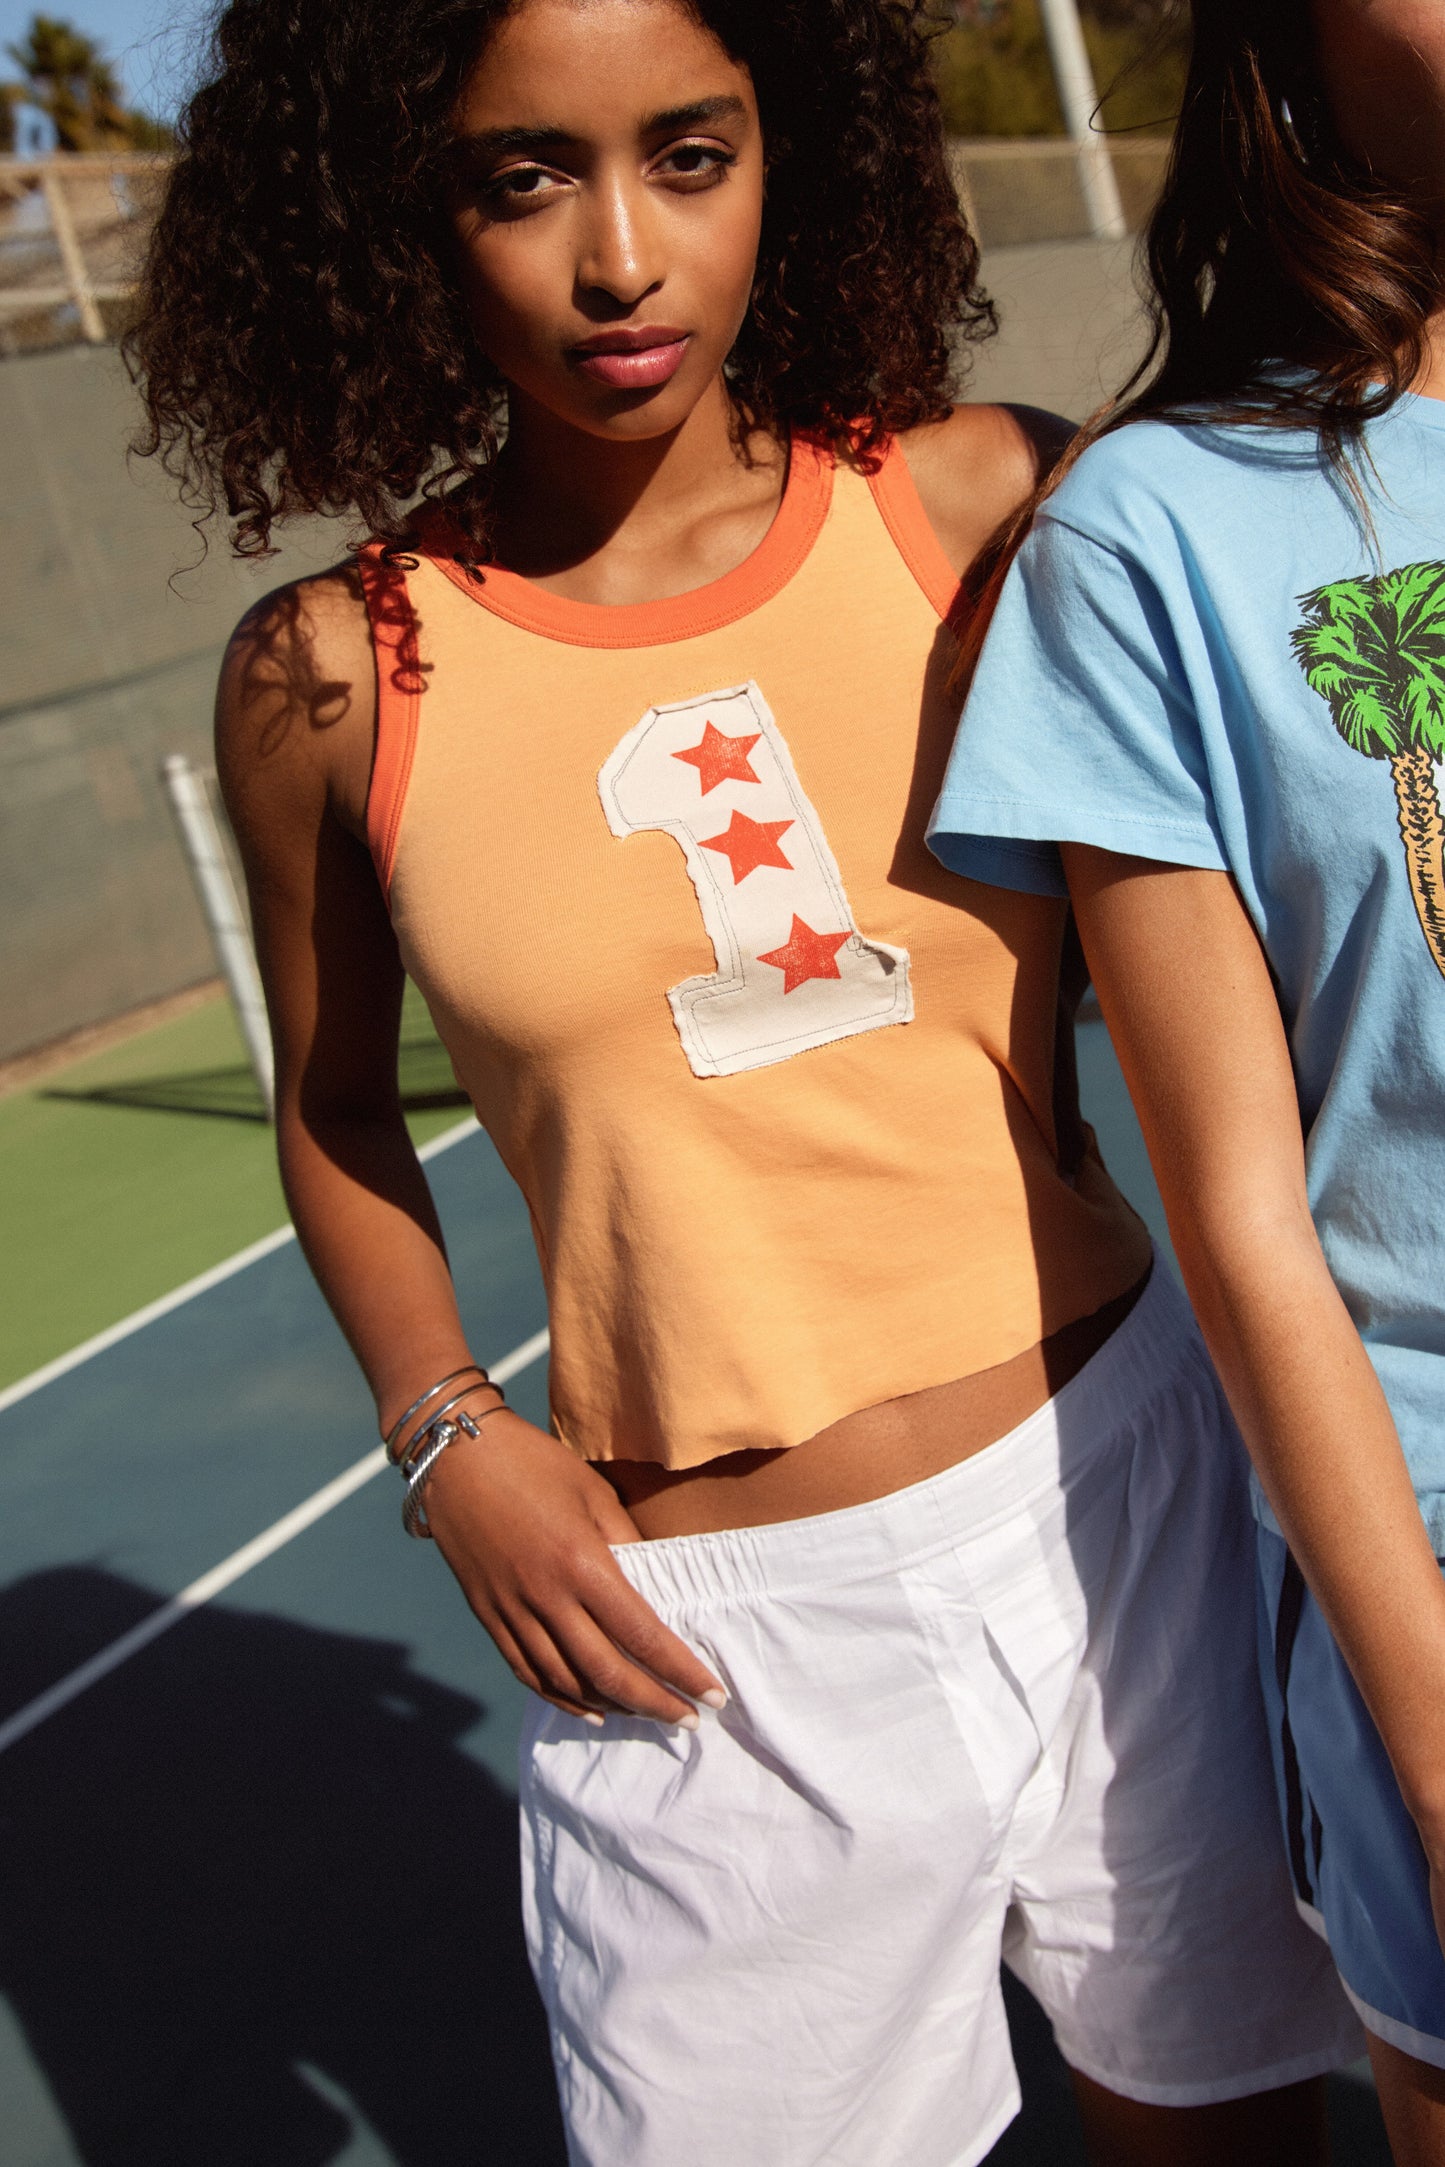 A model featuring an orange racer tank designed with a one with three stars.